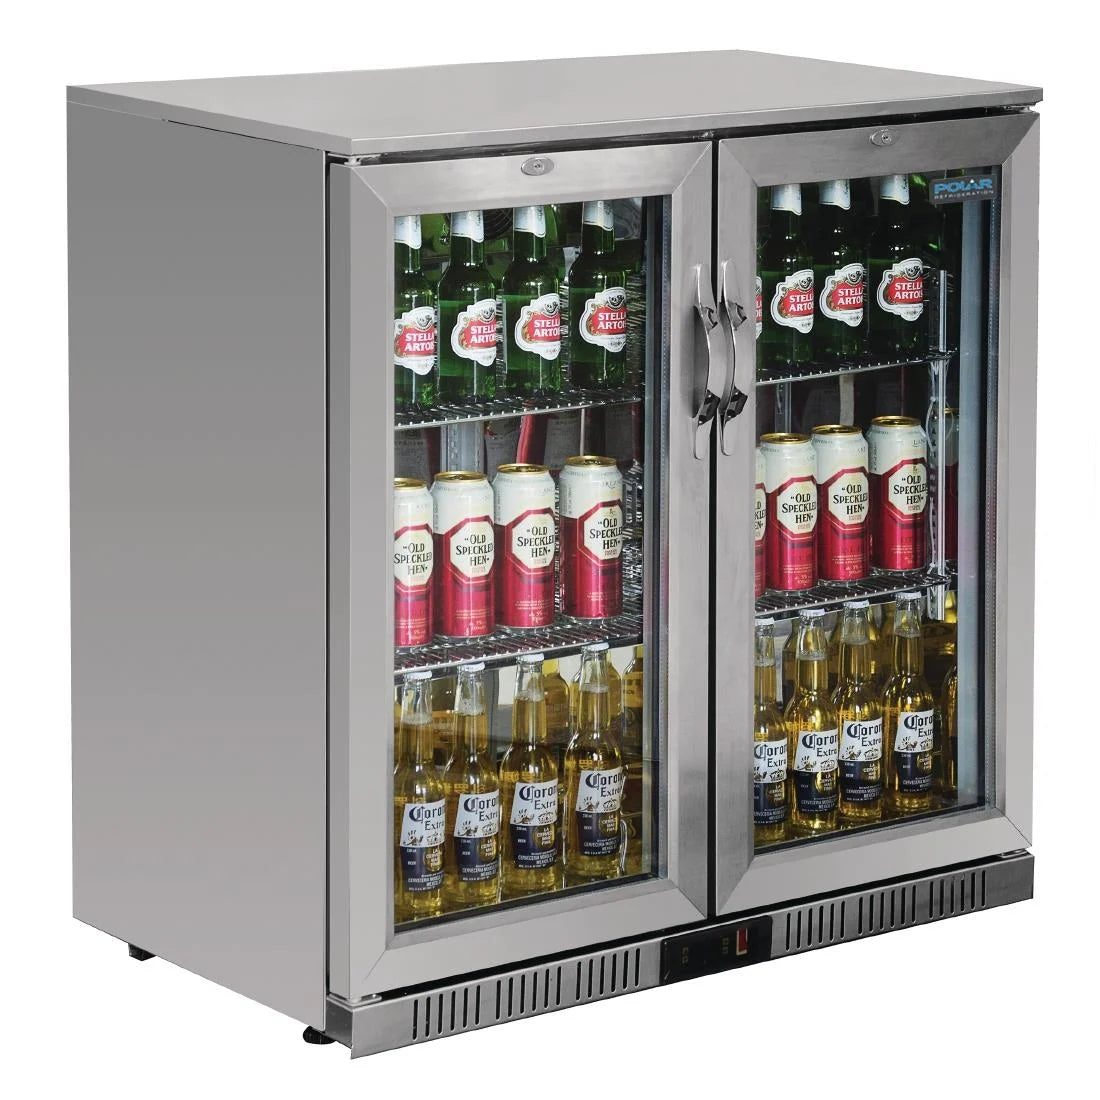 Polar GL008 Back Bar Cooler with Hinged Doors Stainless Steel 208Ltr.Product Ref:00596.Model: GL008. 🚚 1-3 Days Delivery